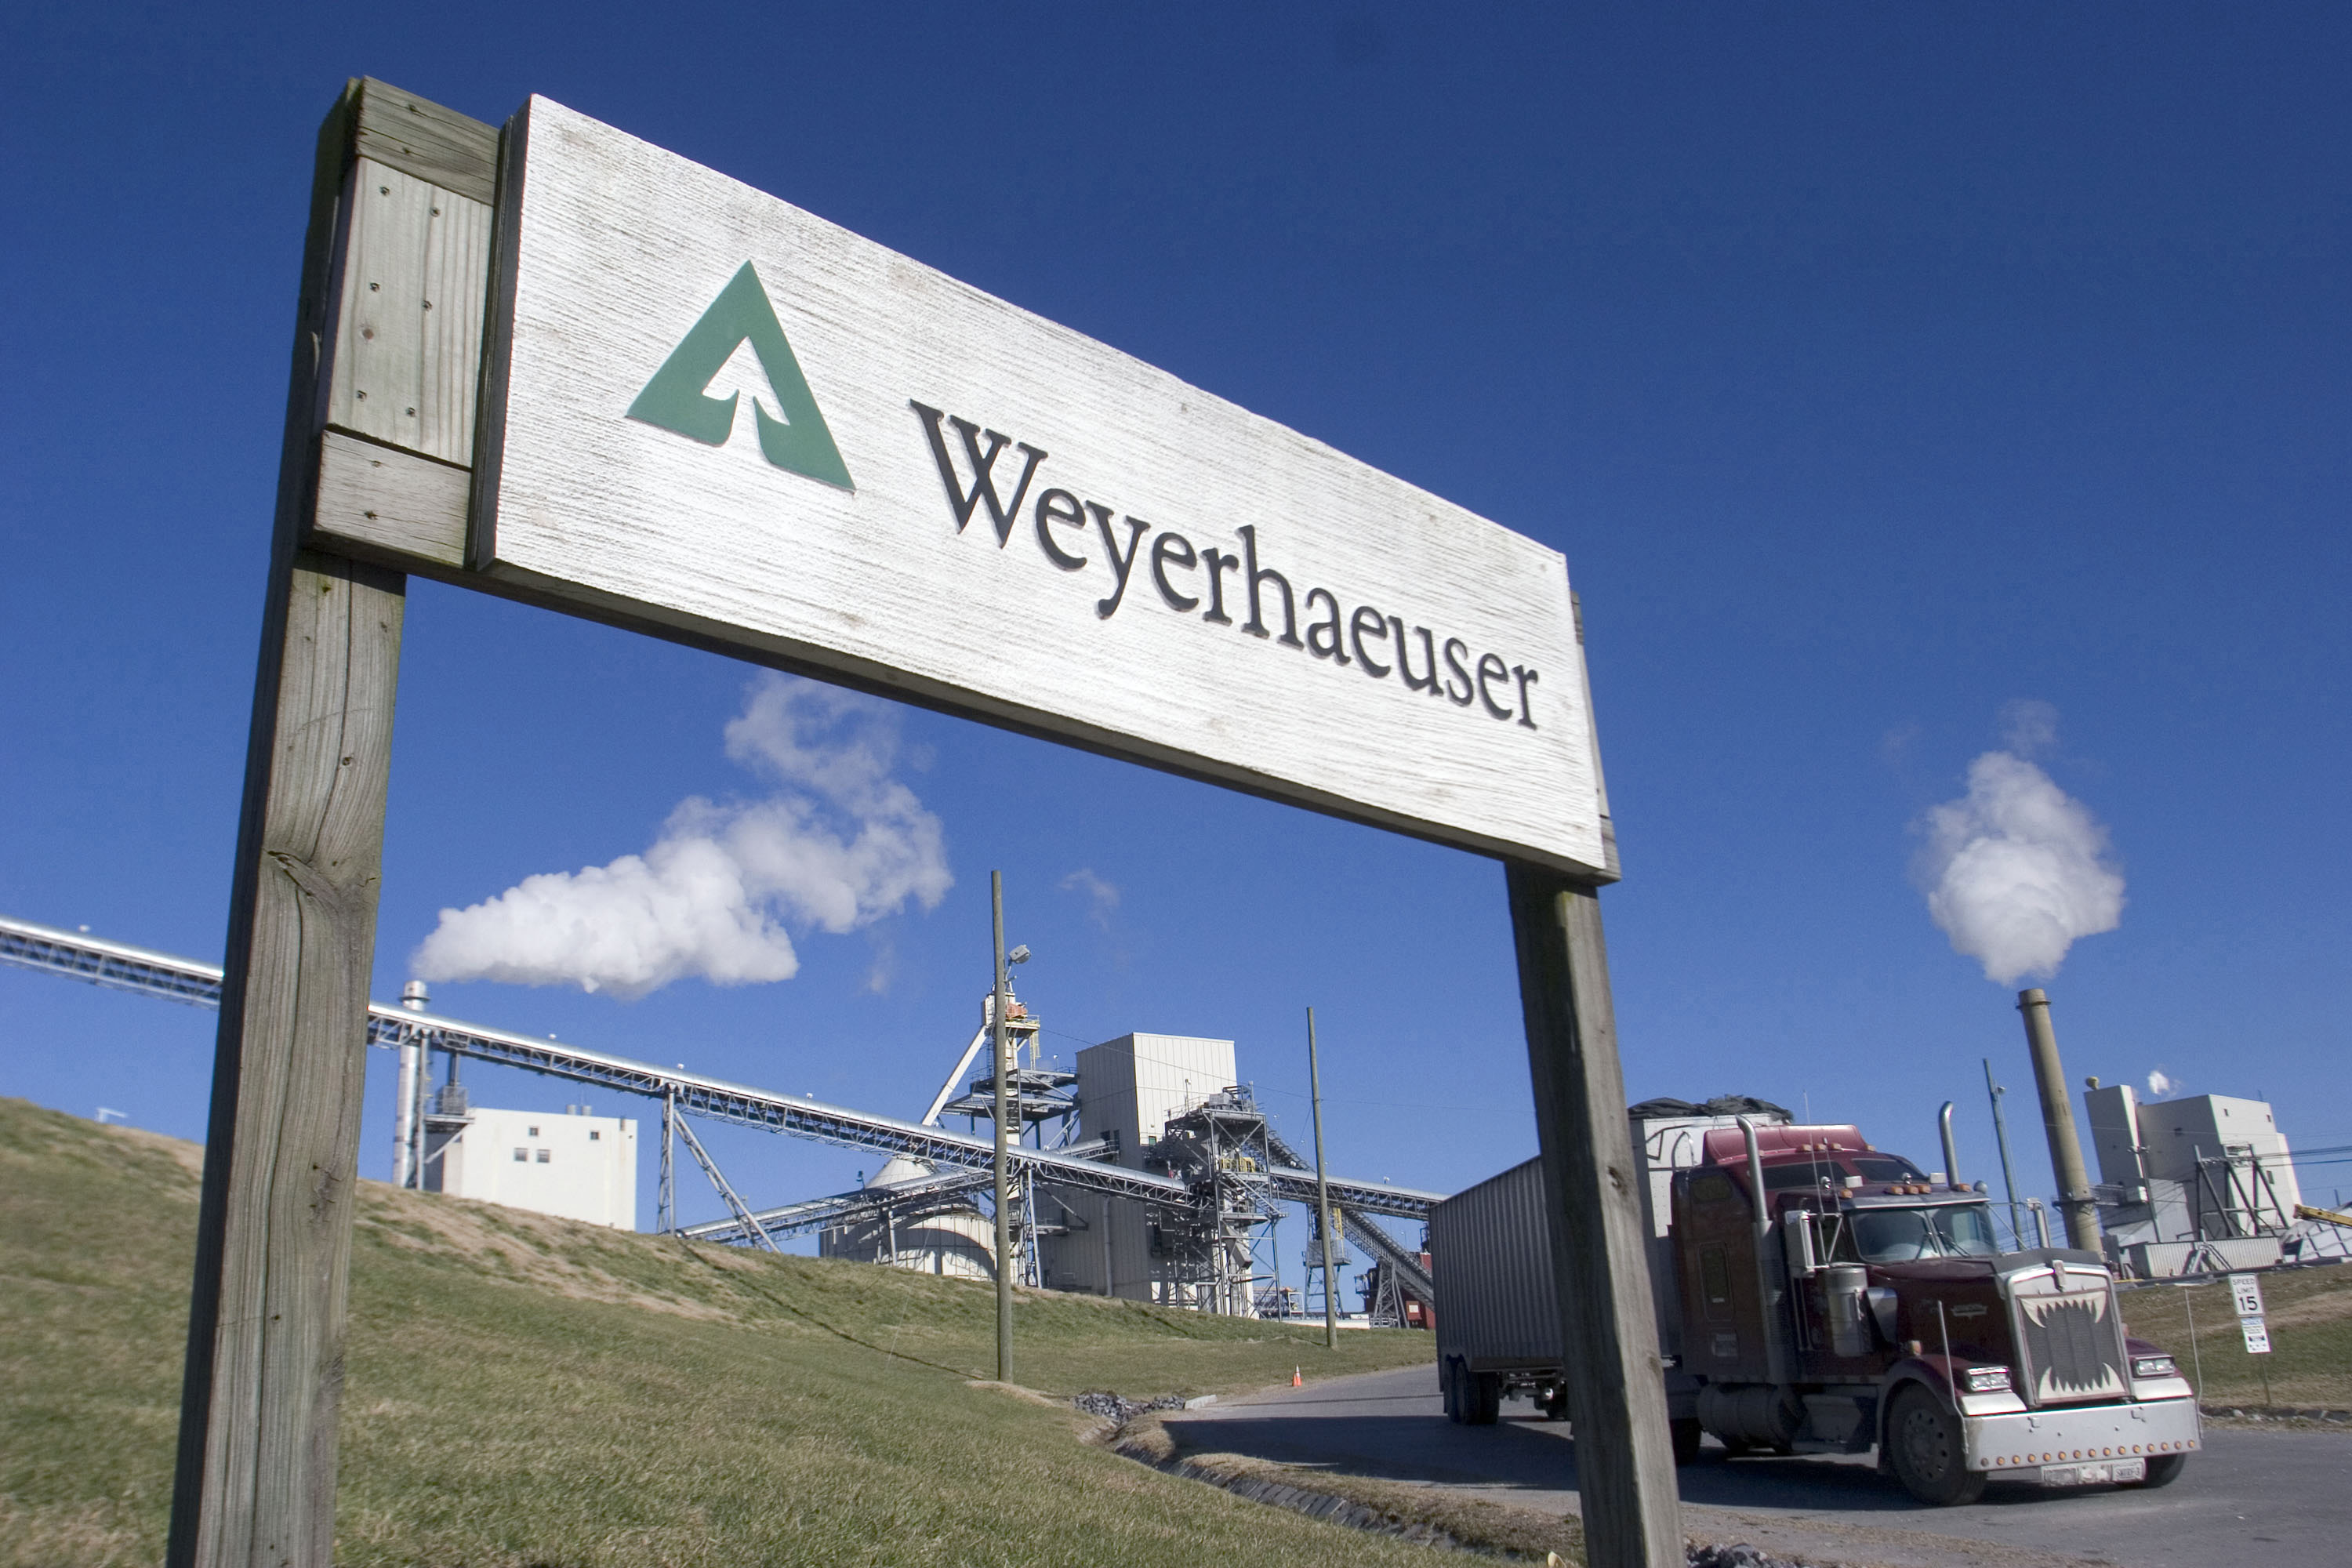 Weyerhaeuser’s prospects depend on continuing strong home sales